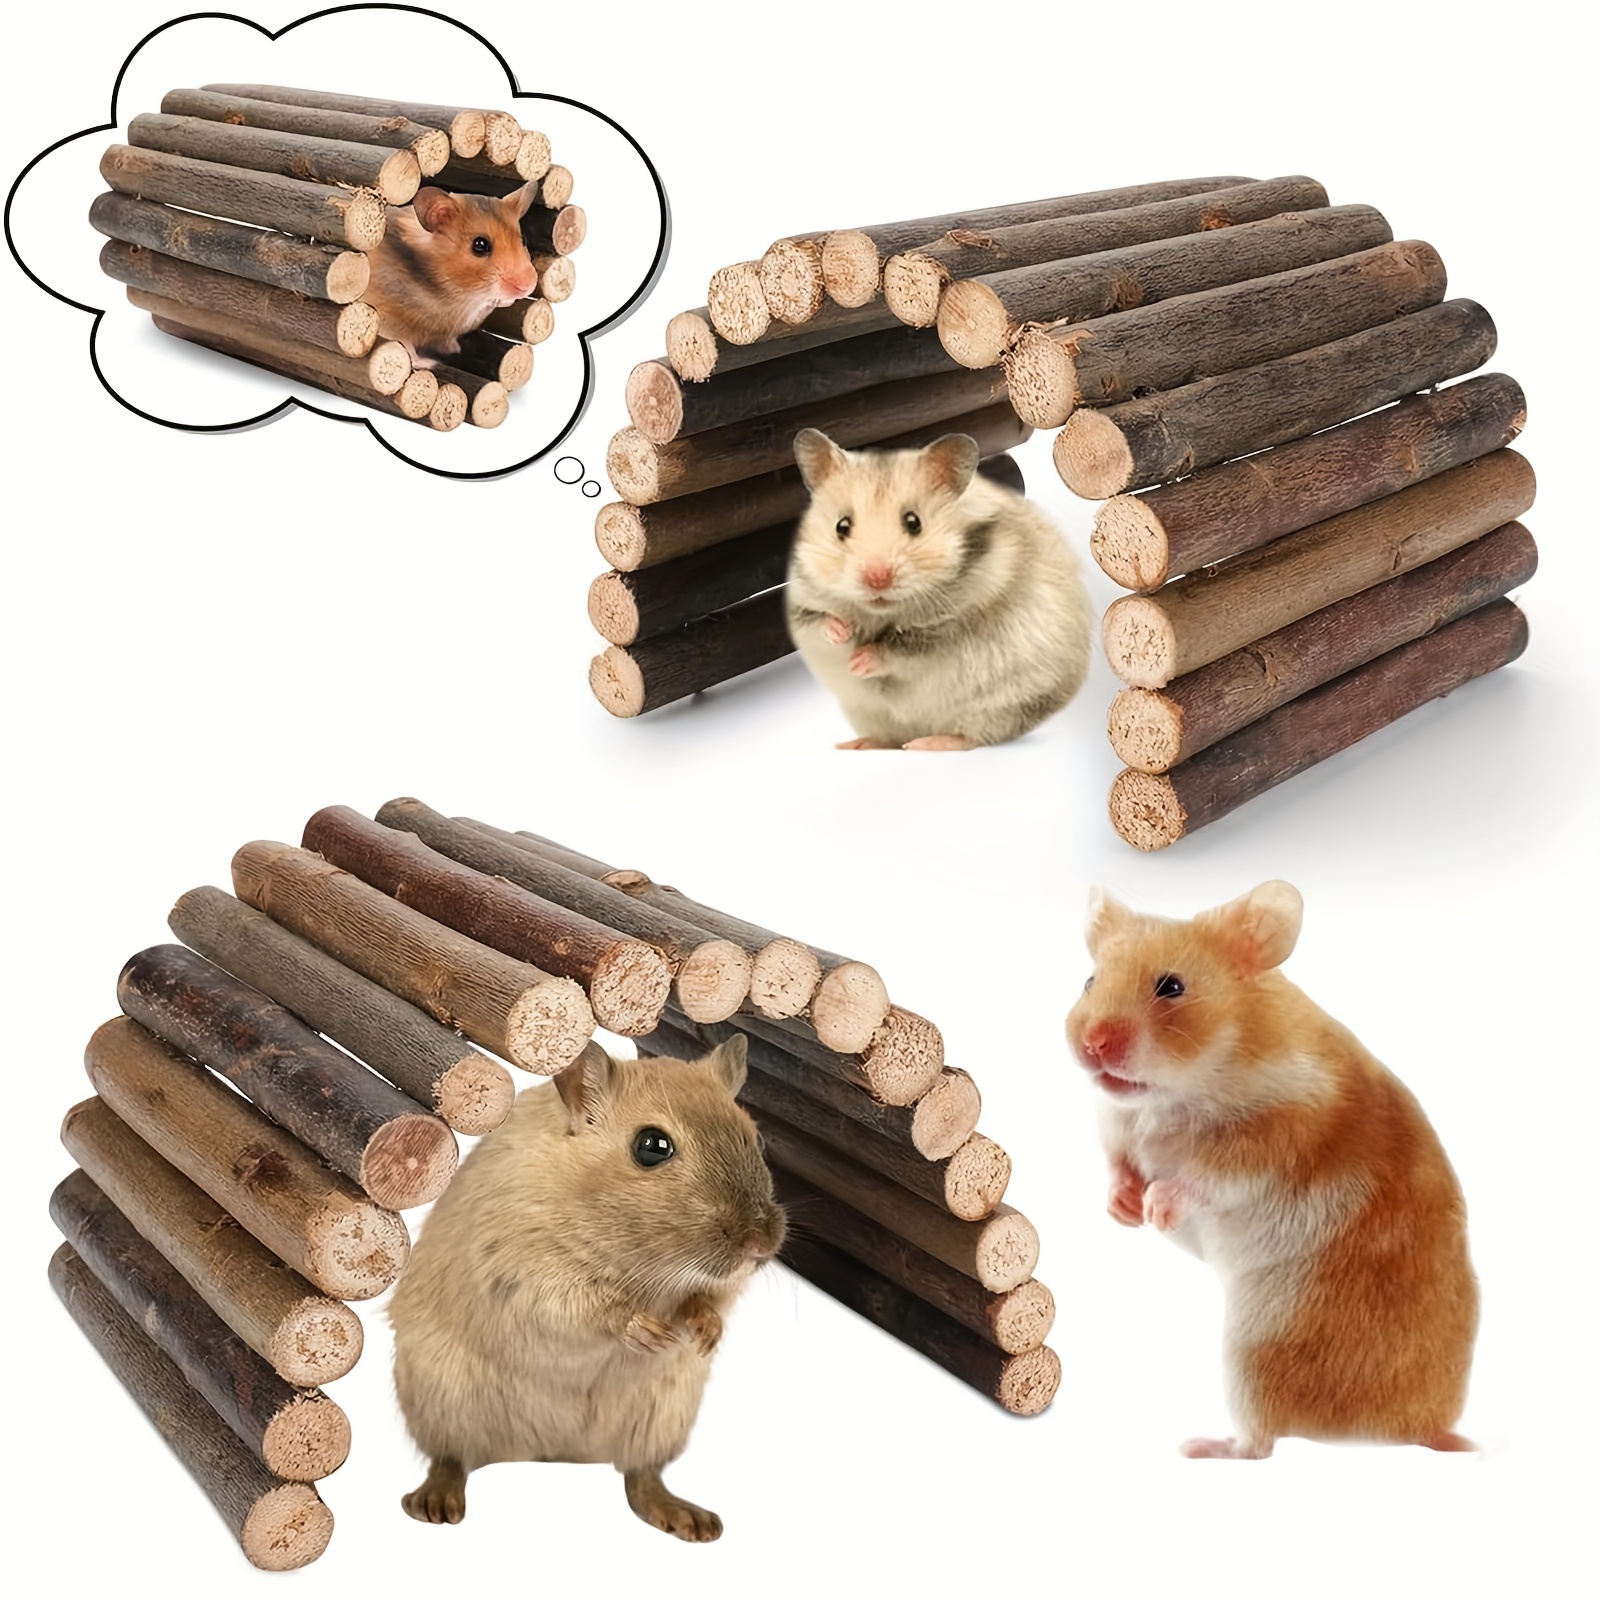 

Hamster Hideout Hut - Natural Wood Chew Toy Tunnel For Small Animals - Pet Accessory For Guinea Pigs, Chinchillas, Mice, Rats, And Rabbits - Flexible Wooden Hideaway Shelter For Gnawing And Play.